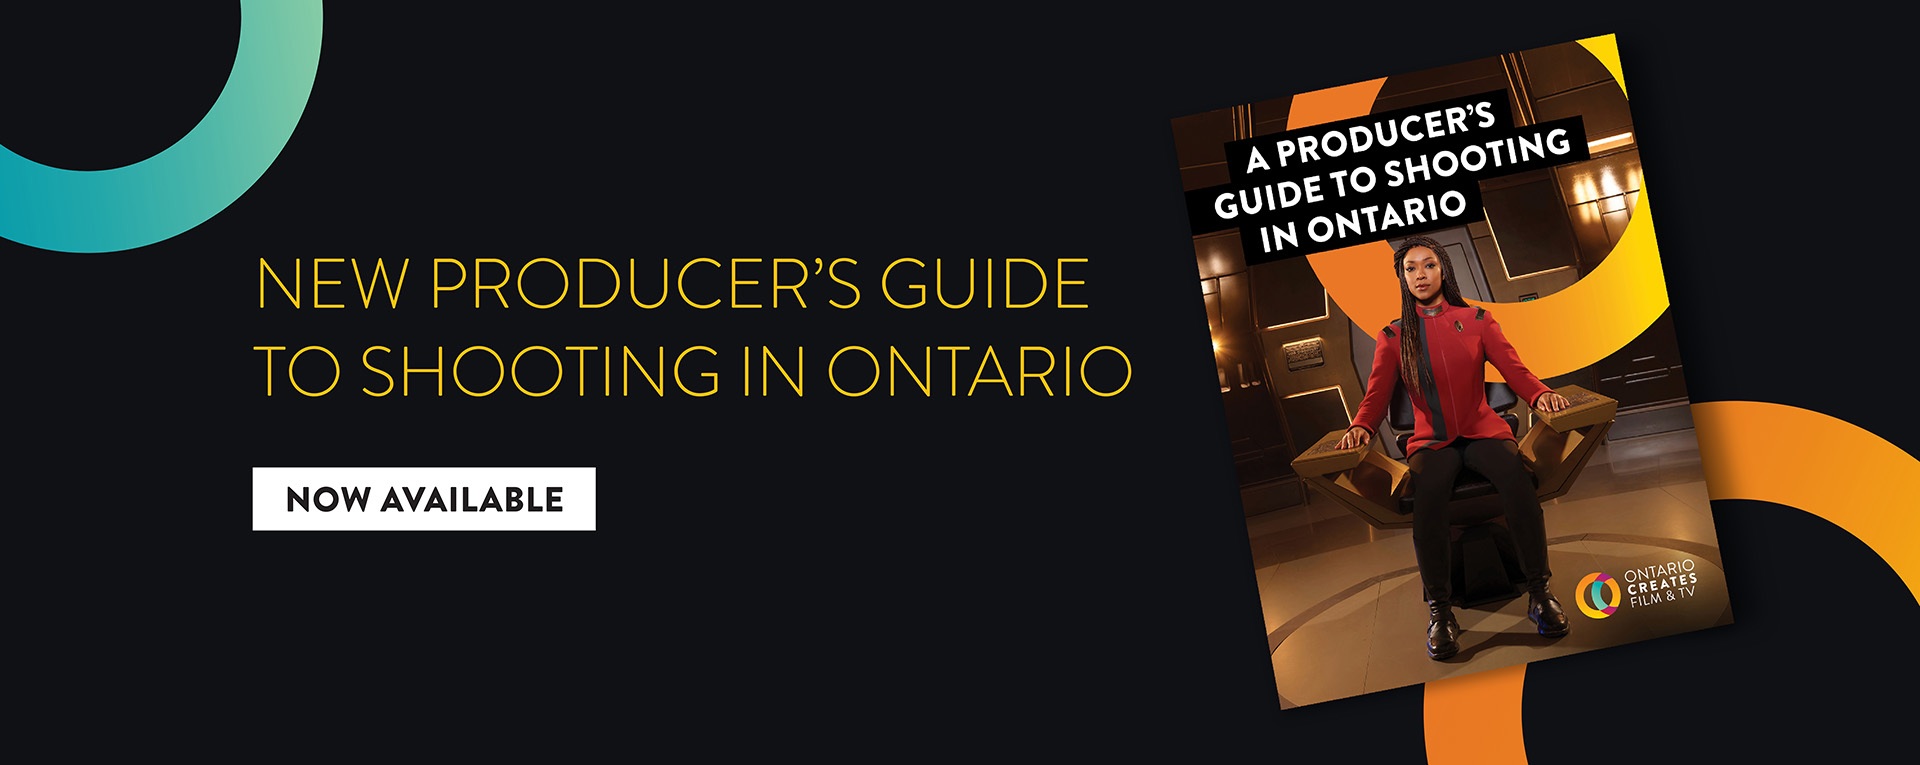 A Producer’s Guide to Shooting in Ontario